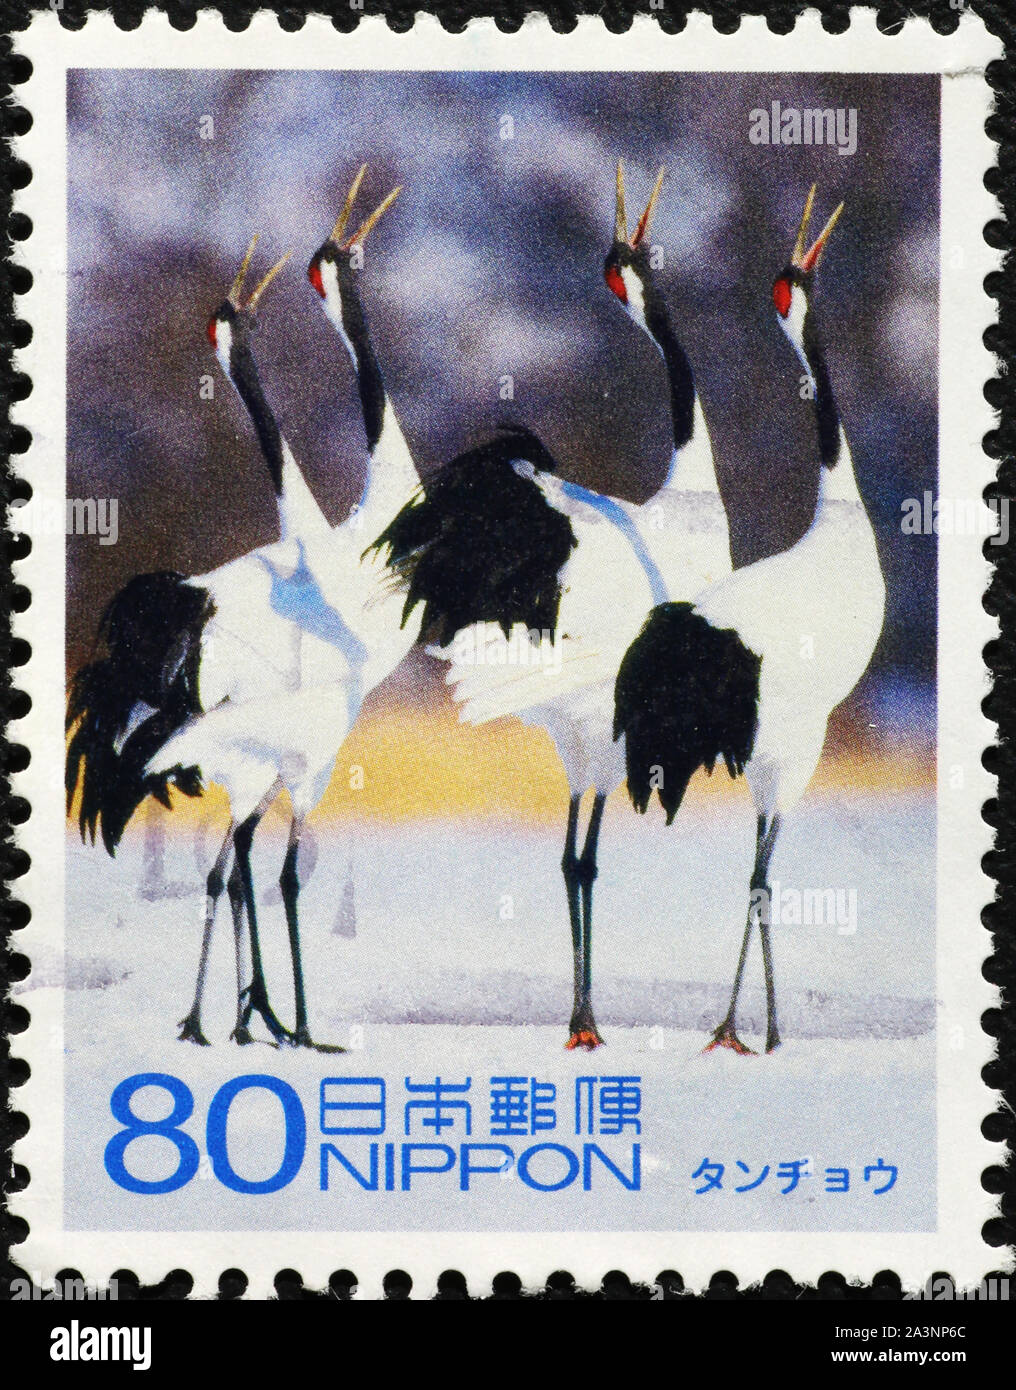 Four calling cranes on japanese postages stamp Stock Photo